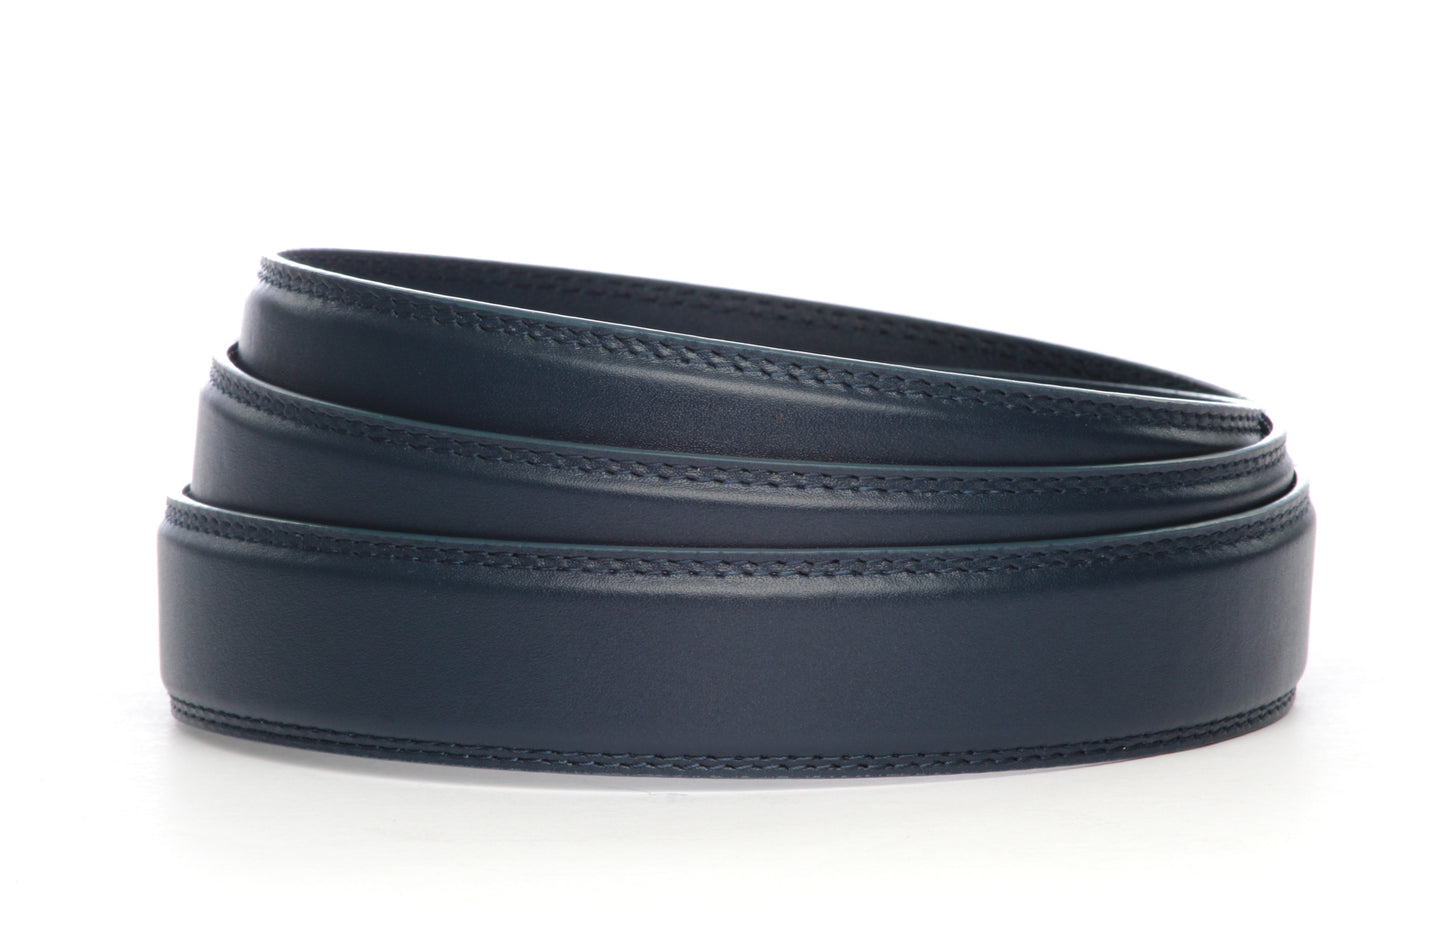 Men's leather belt strap in navy with a 1.25-inch width, formal look